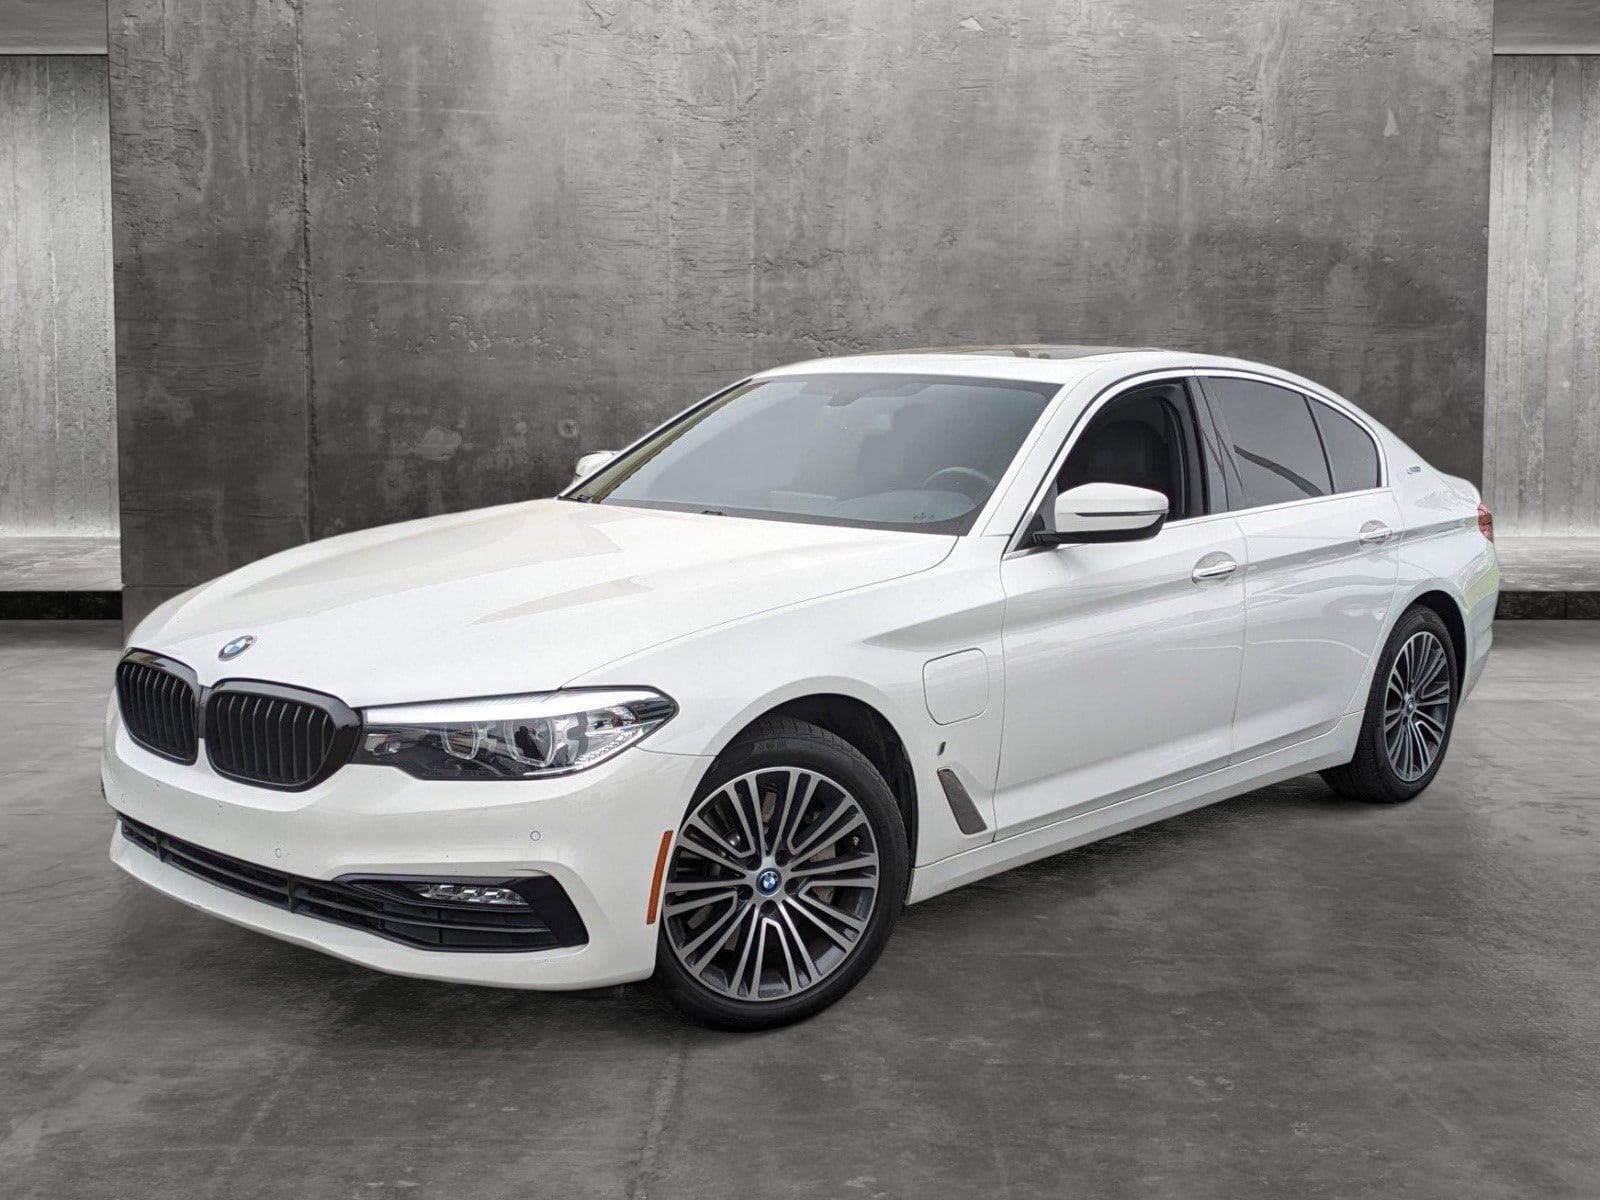 Pre-Owned BMW 5 Series For Sale Near Me | BMW of Carlsbad